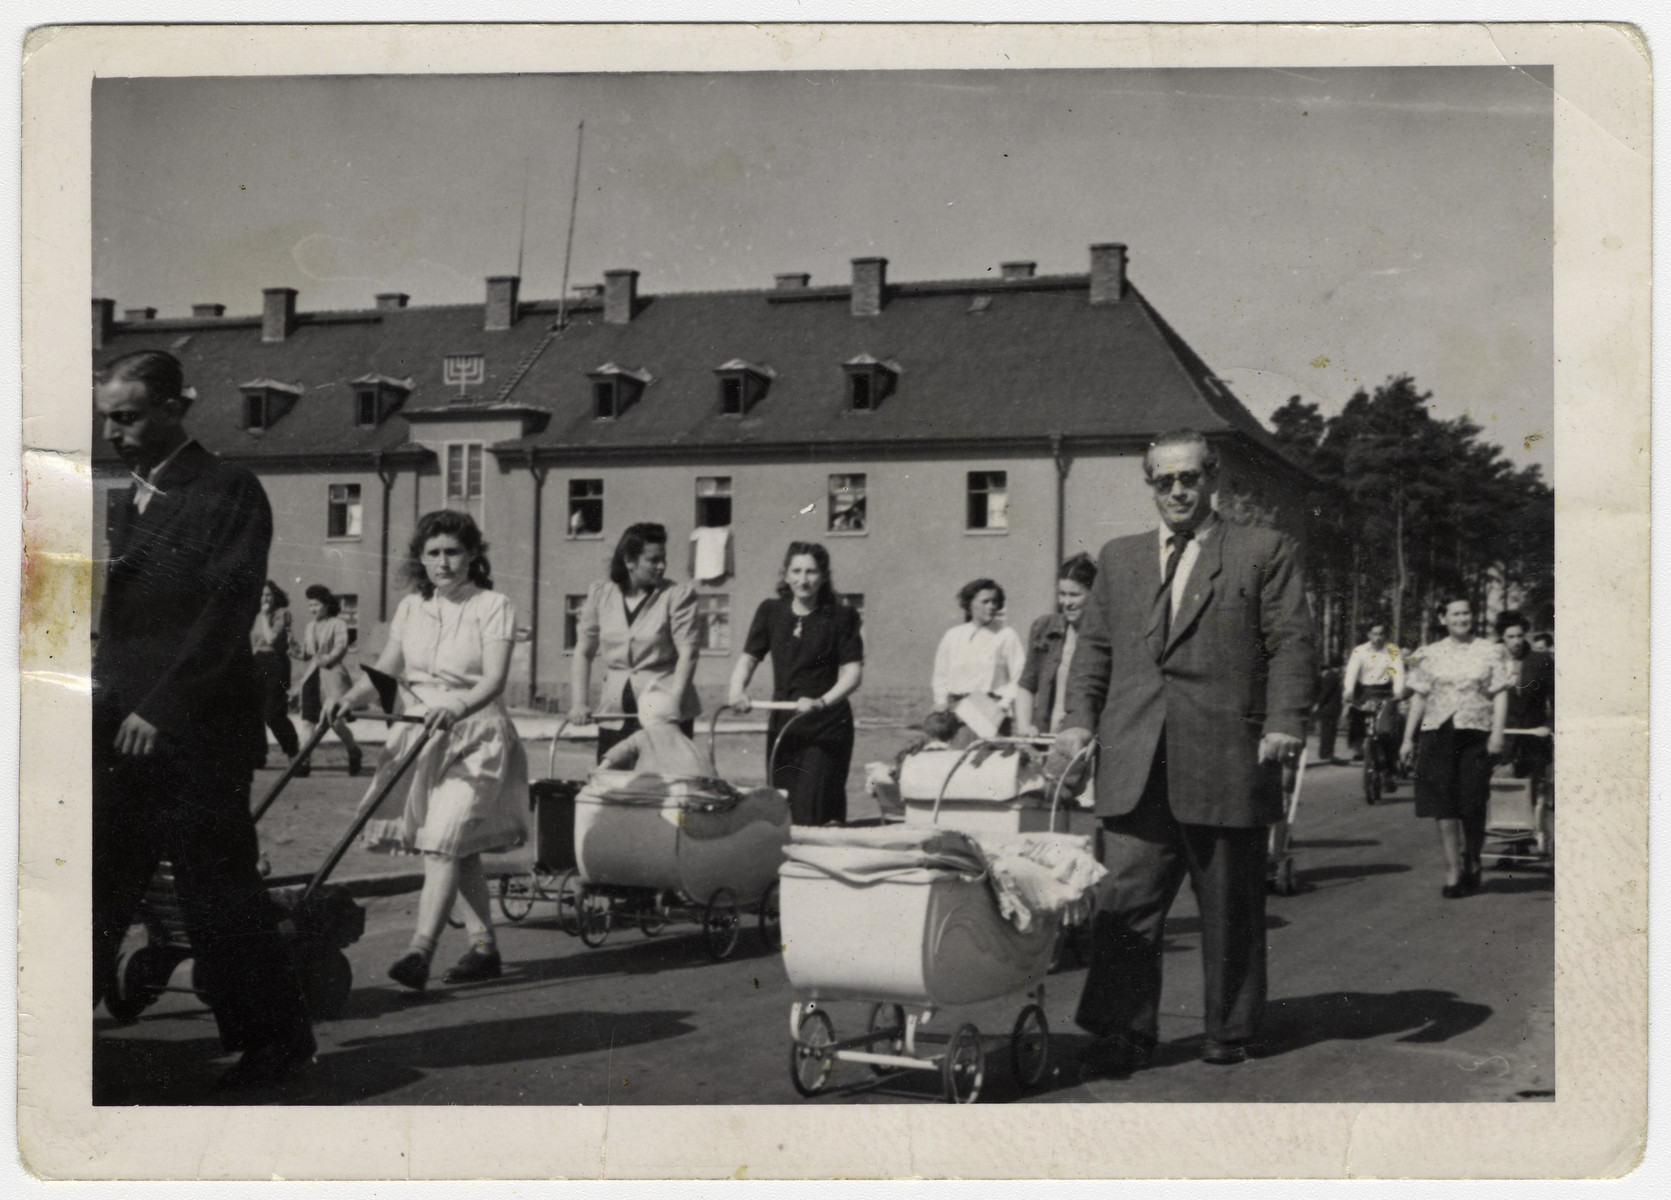 Men and women walk through the central plaza of the Bergen-Belsen displaced persons camp pushing baby carriages.

The gentleman on the right side wearing tinted spectacles, with his right hand on the stroller is Elias Rosengarten.